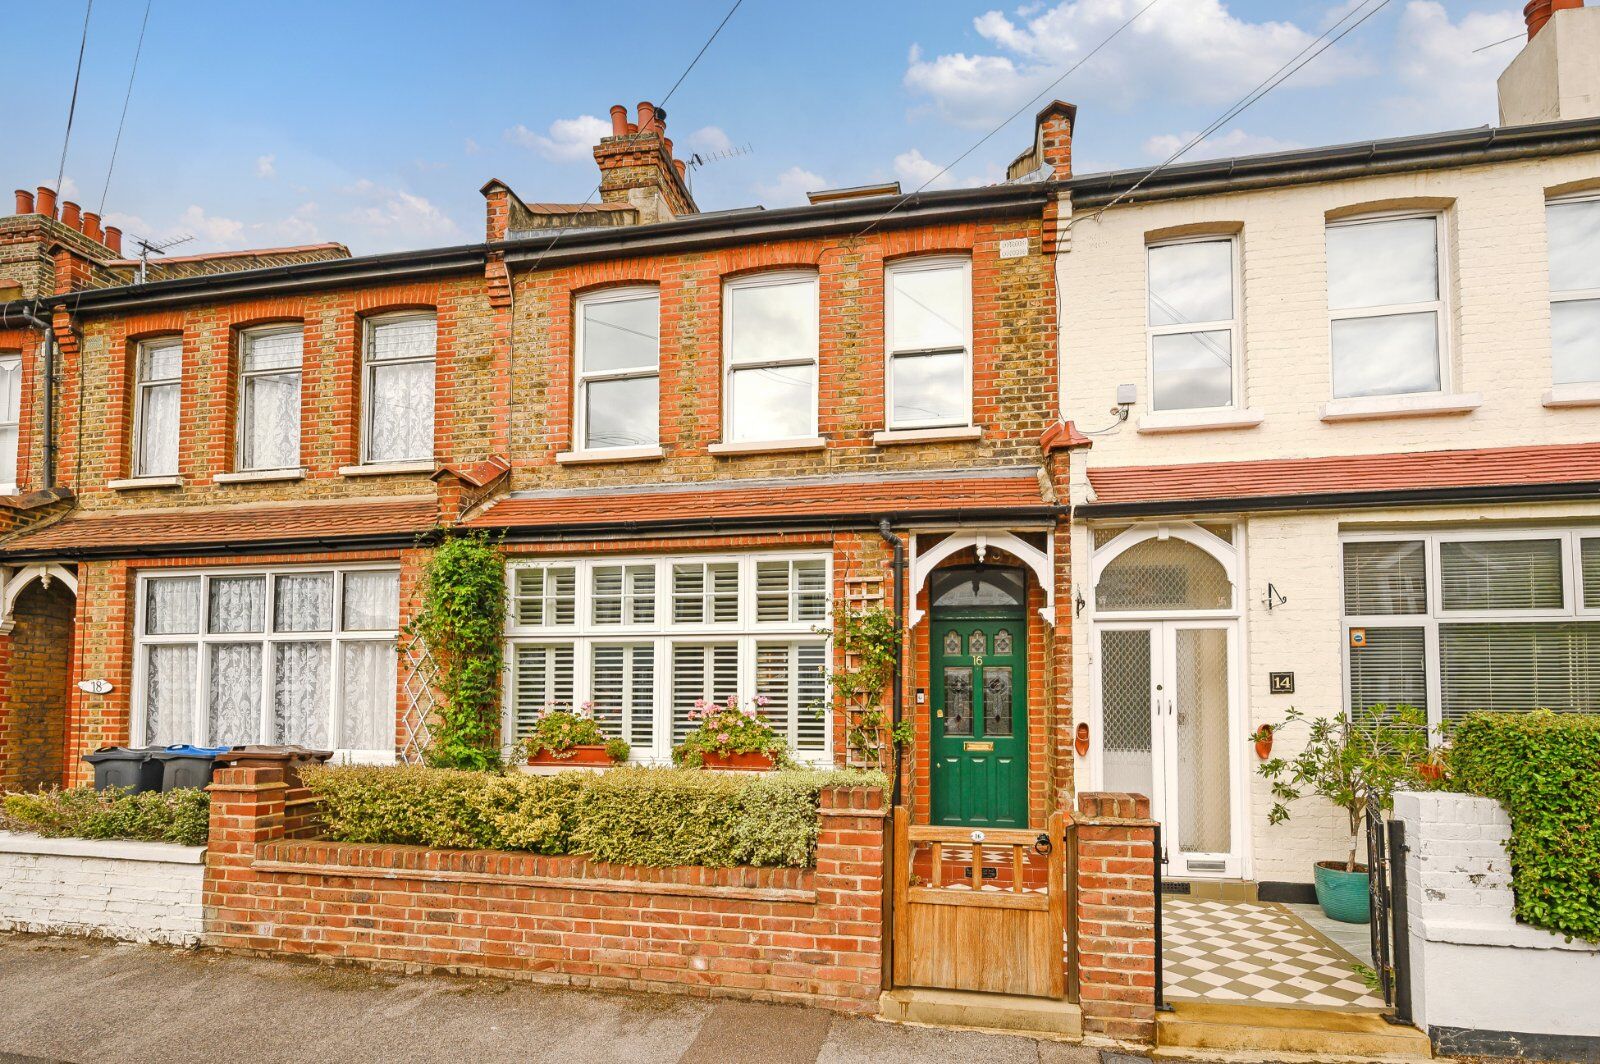 5 bedroom mid terraced house for sale Milner Road, Wimbledon, SW19, main image